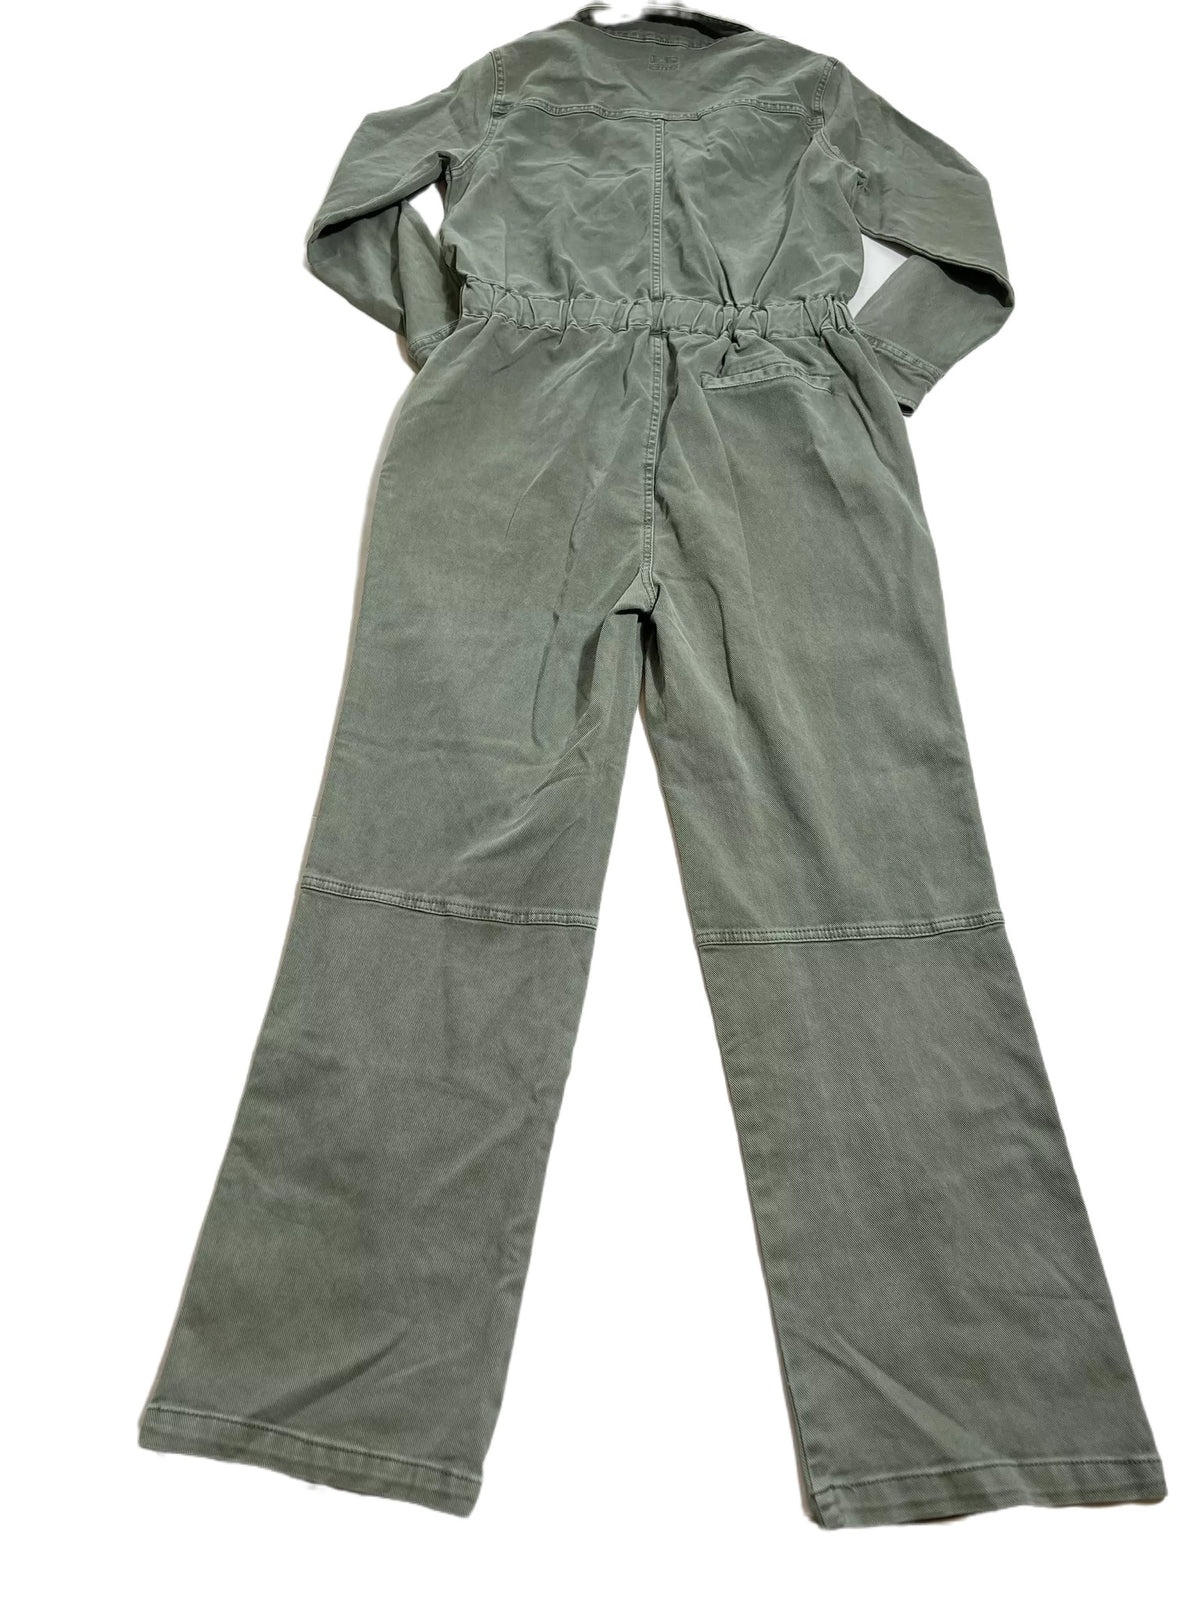 Faherty- Olive "Overland Twill" Jumpsuit - NEW WITH TAGS